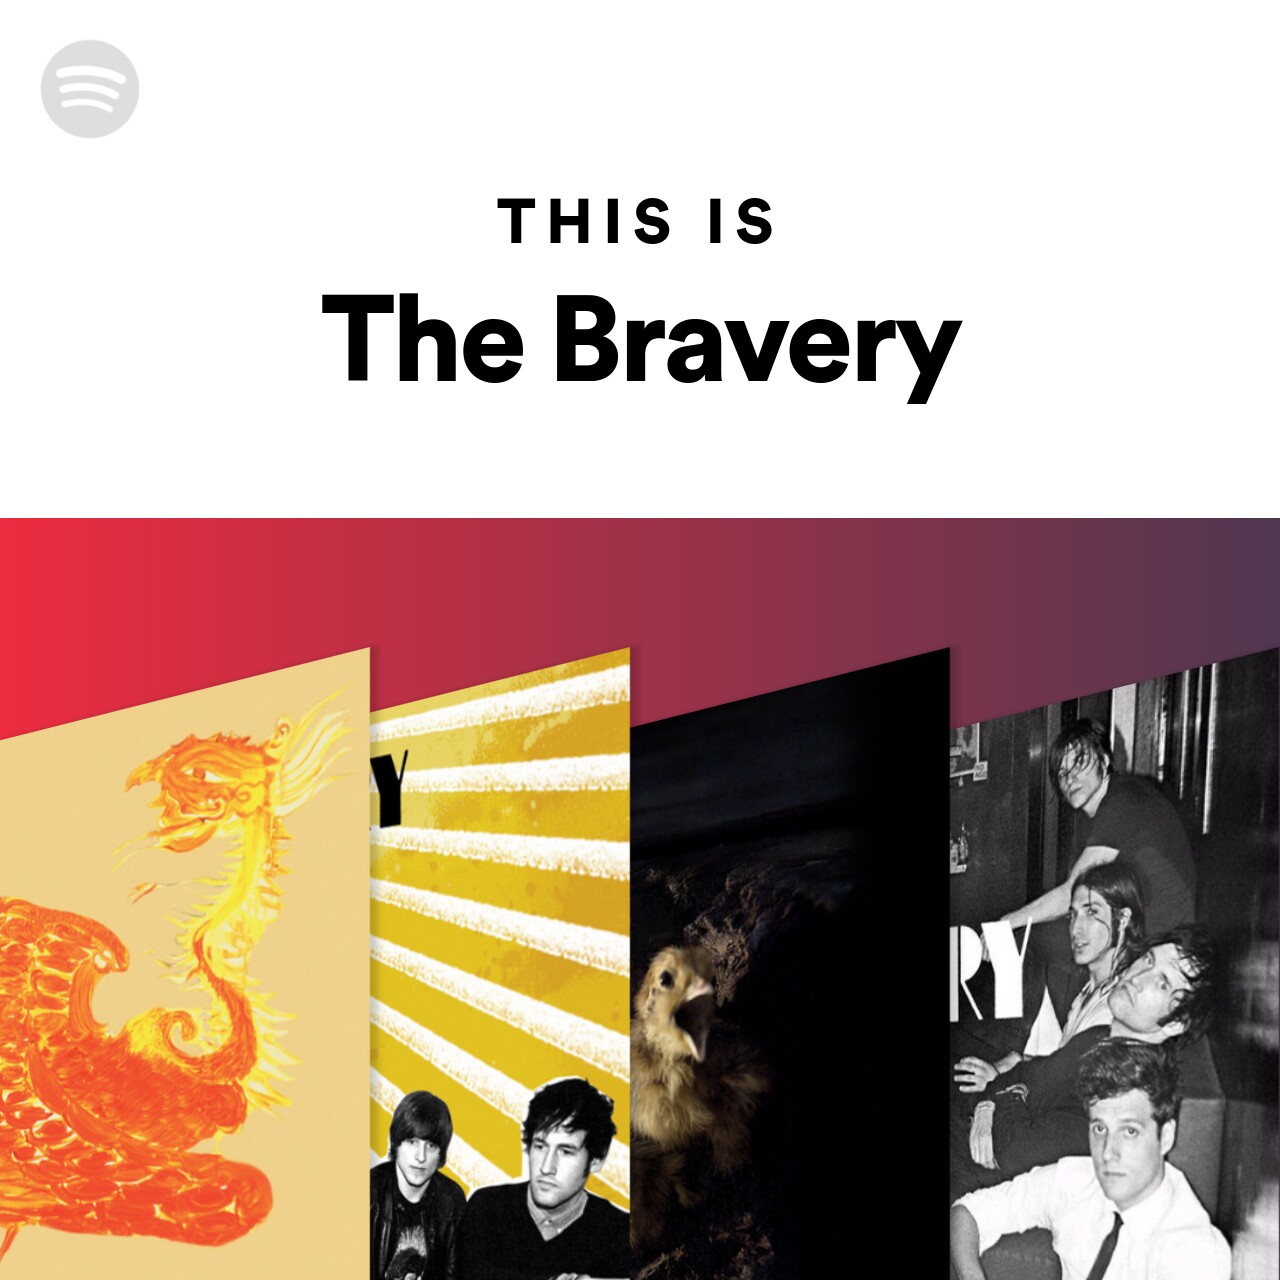 This Is The Bravery